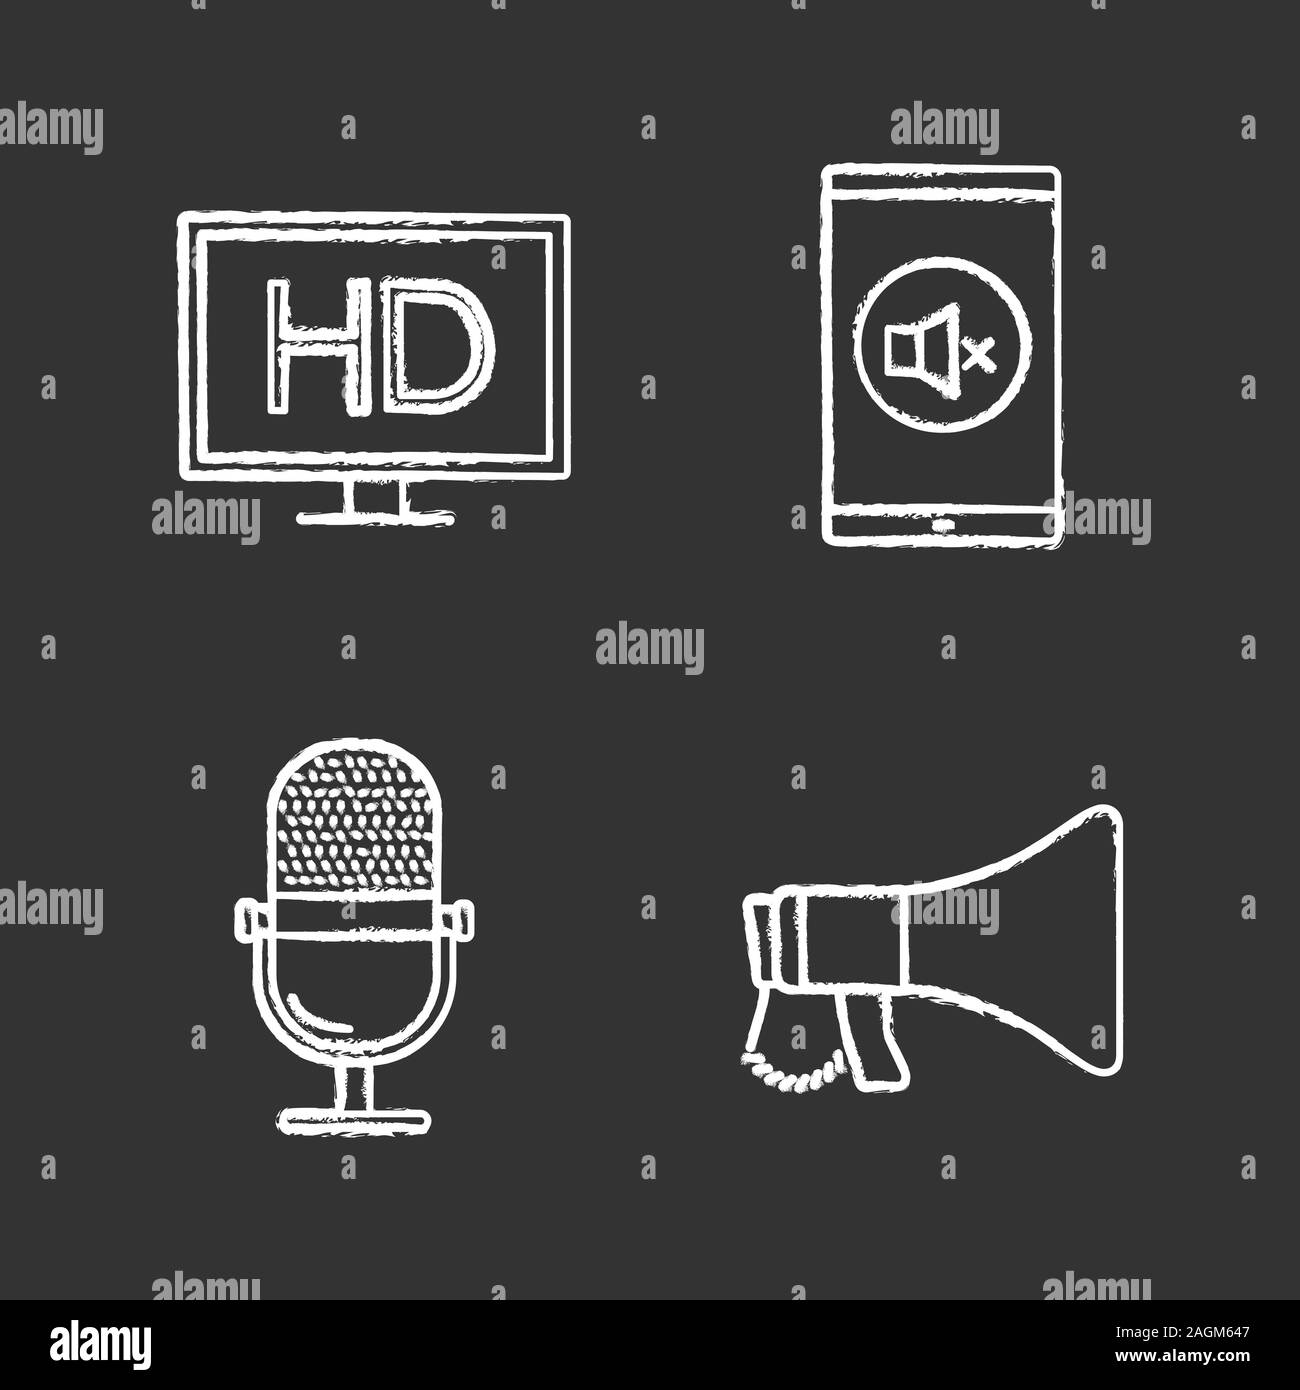 Cinema chalk icons set. HD display, mute mode, microphone, megaphone. Isolated vector chalkboard illustrations Stock Vector